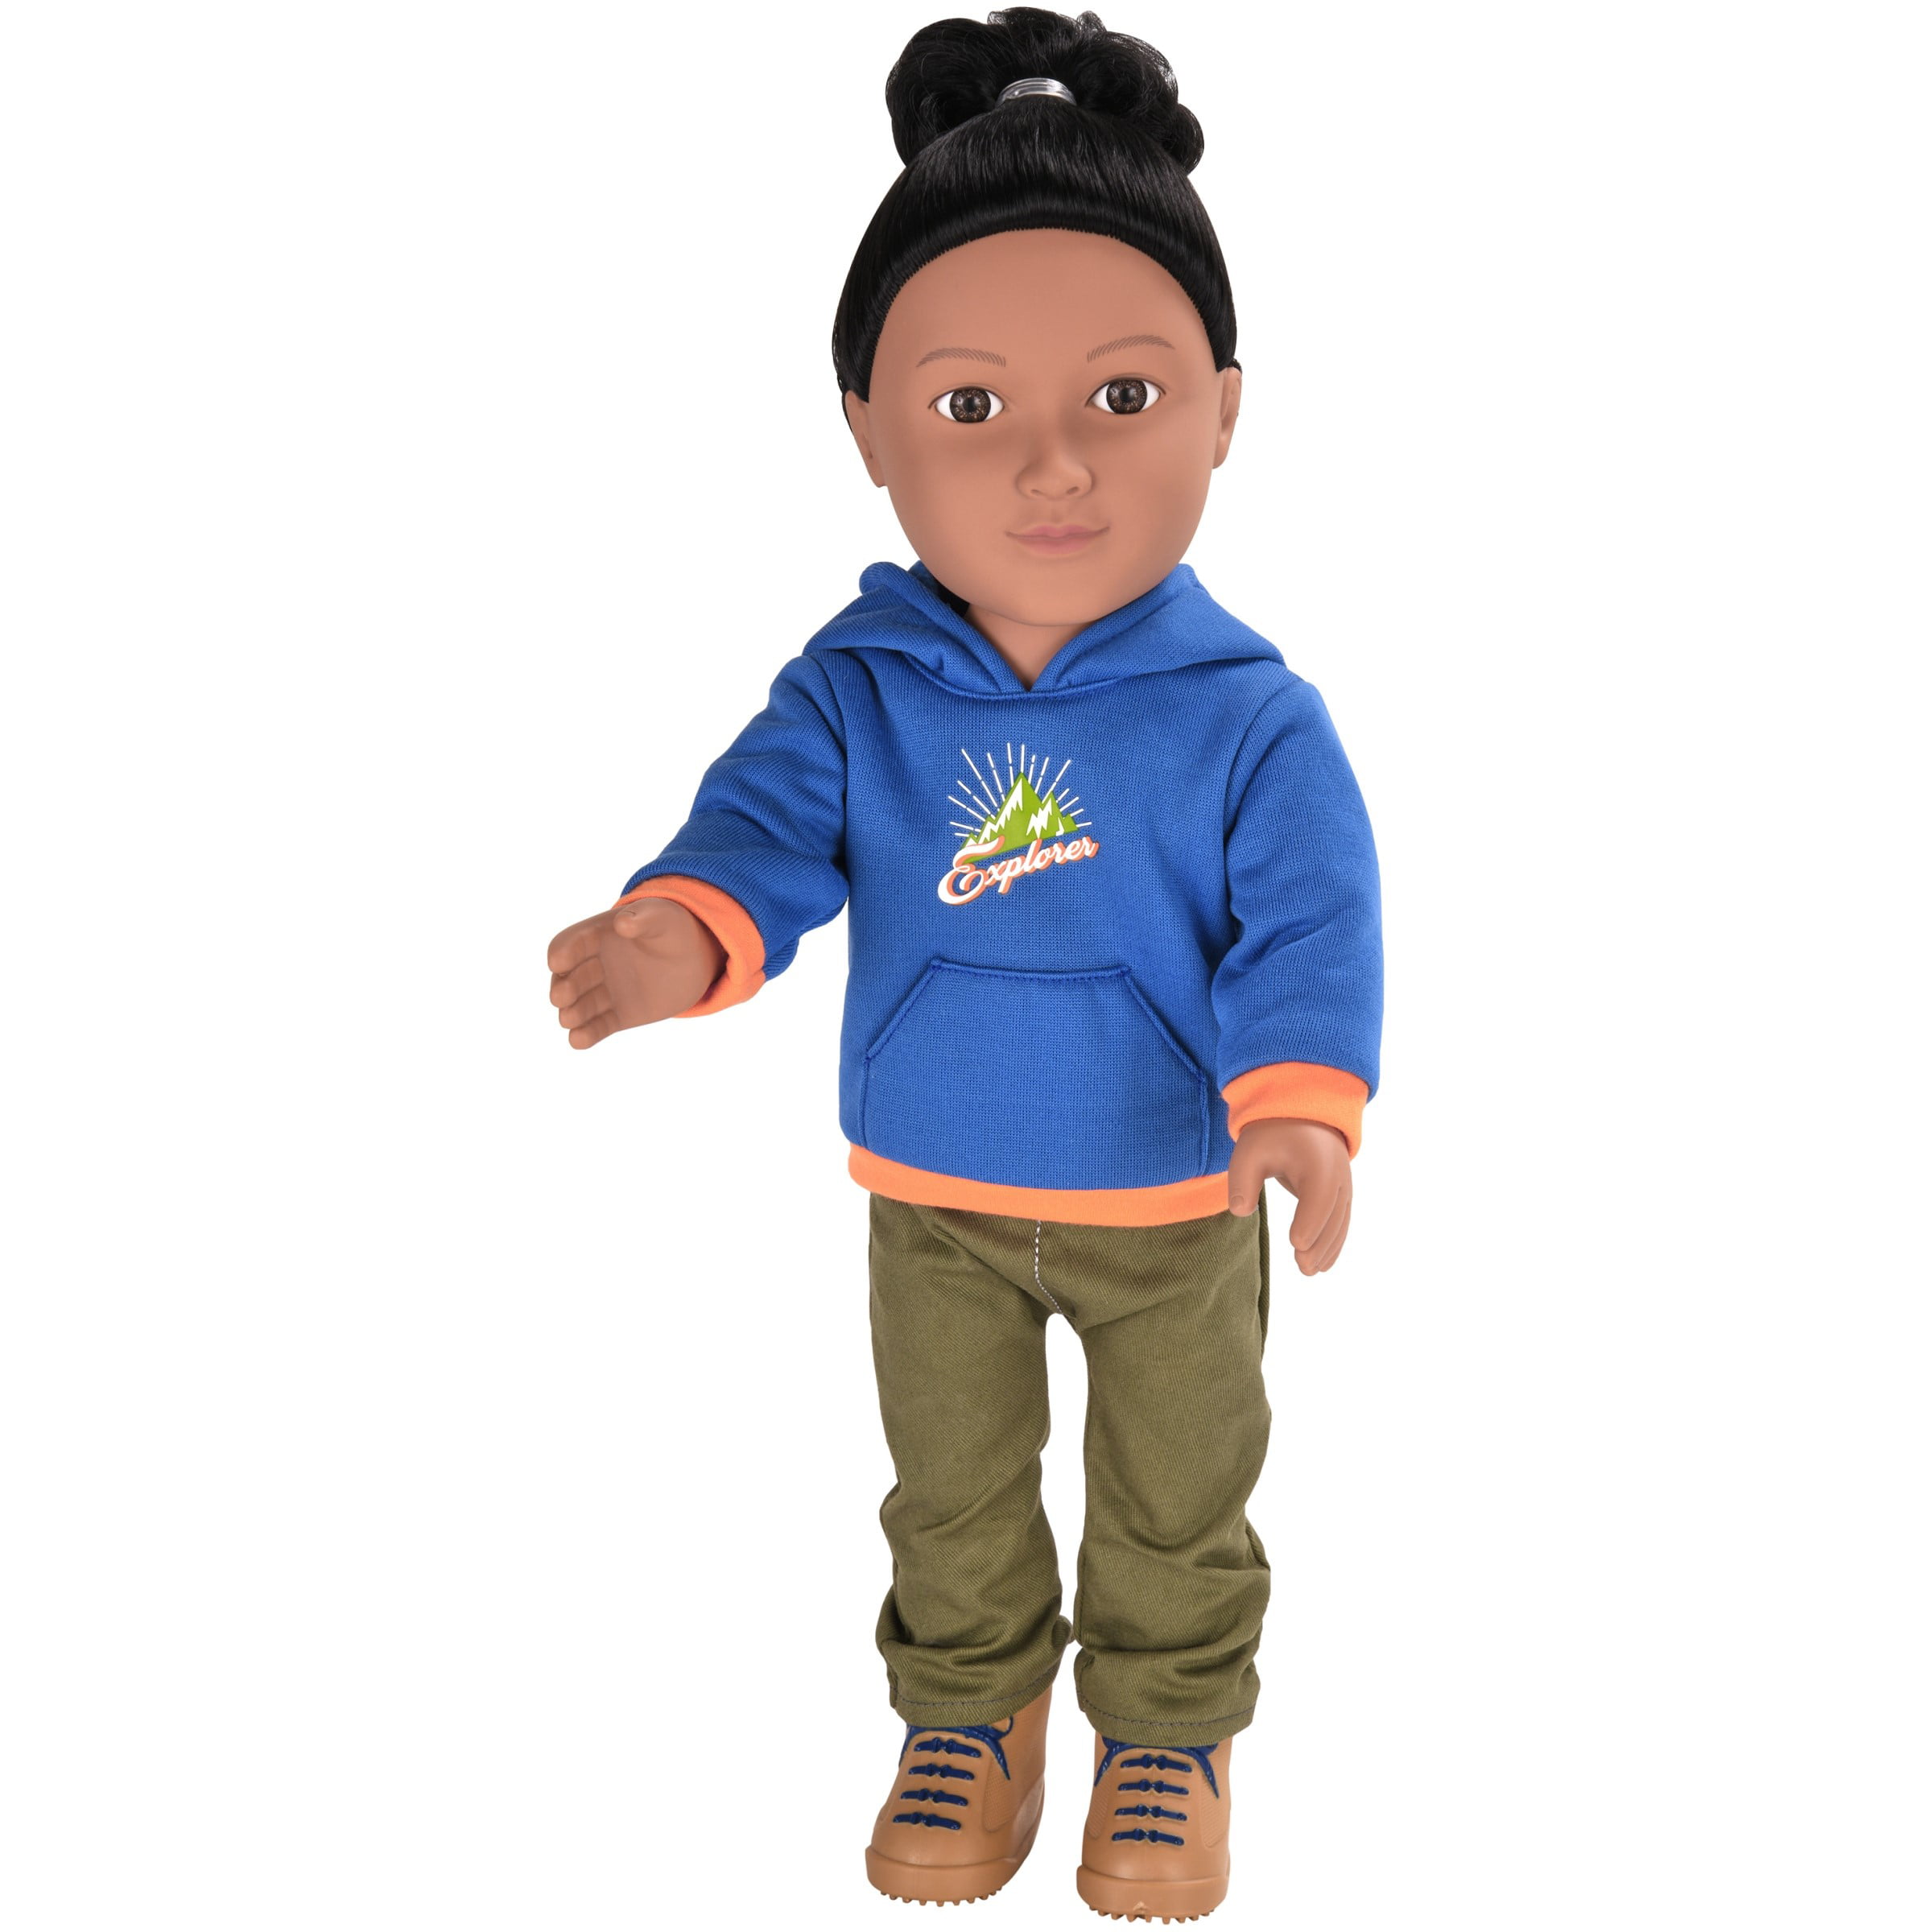 My Life As Outdoorsy Boy 18-inch Posable Doll, Dark Brown Hair 